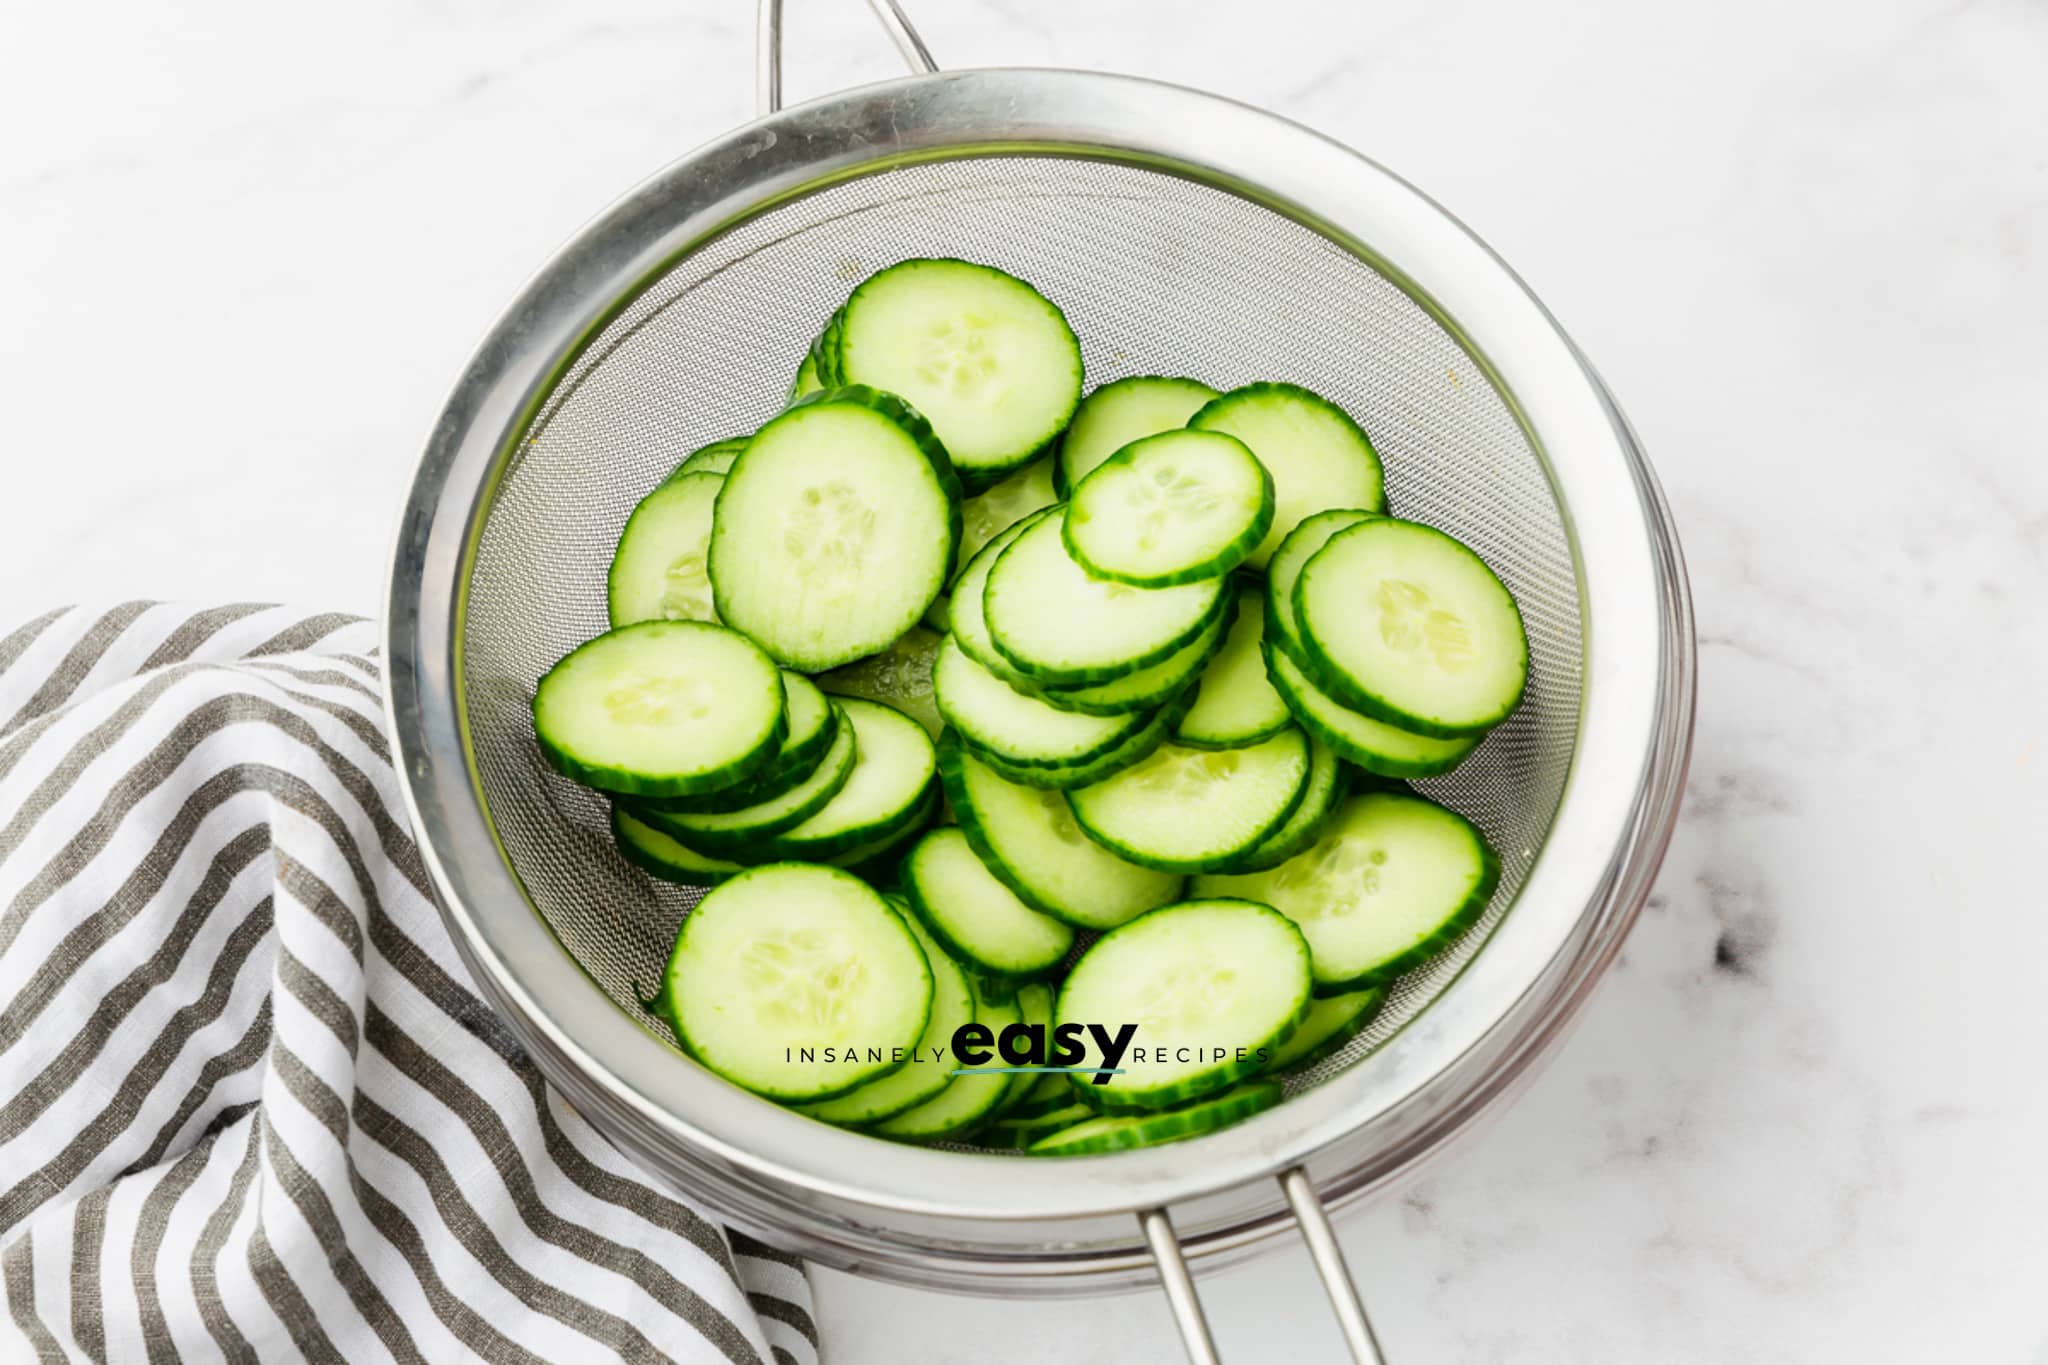 a mesh sieve filled with thinly sliced cucumbers.